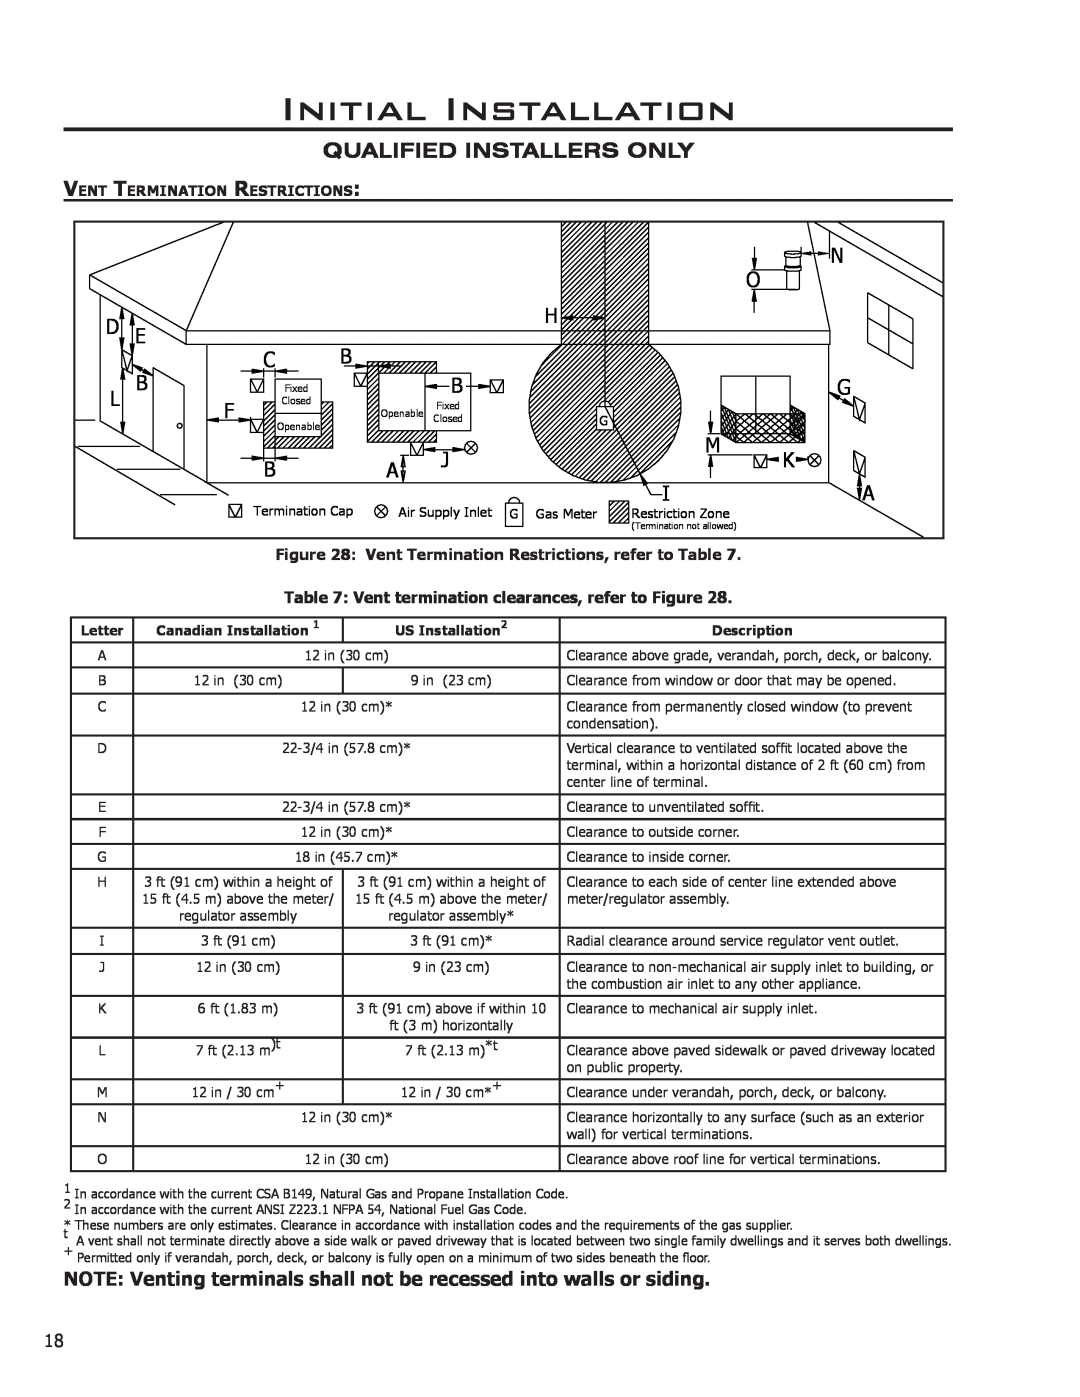 Enviro Cara owner manual NOTE Venting terminals shall not be recessed into walls or siding, Initial Installation 